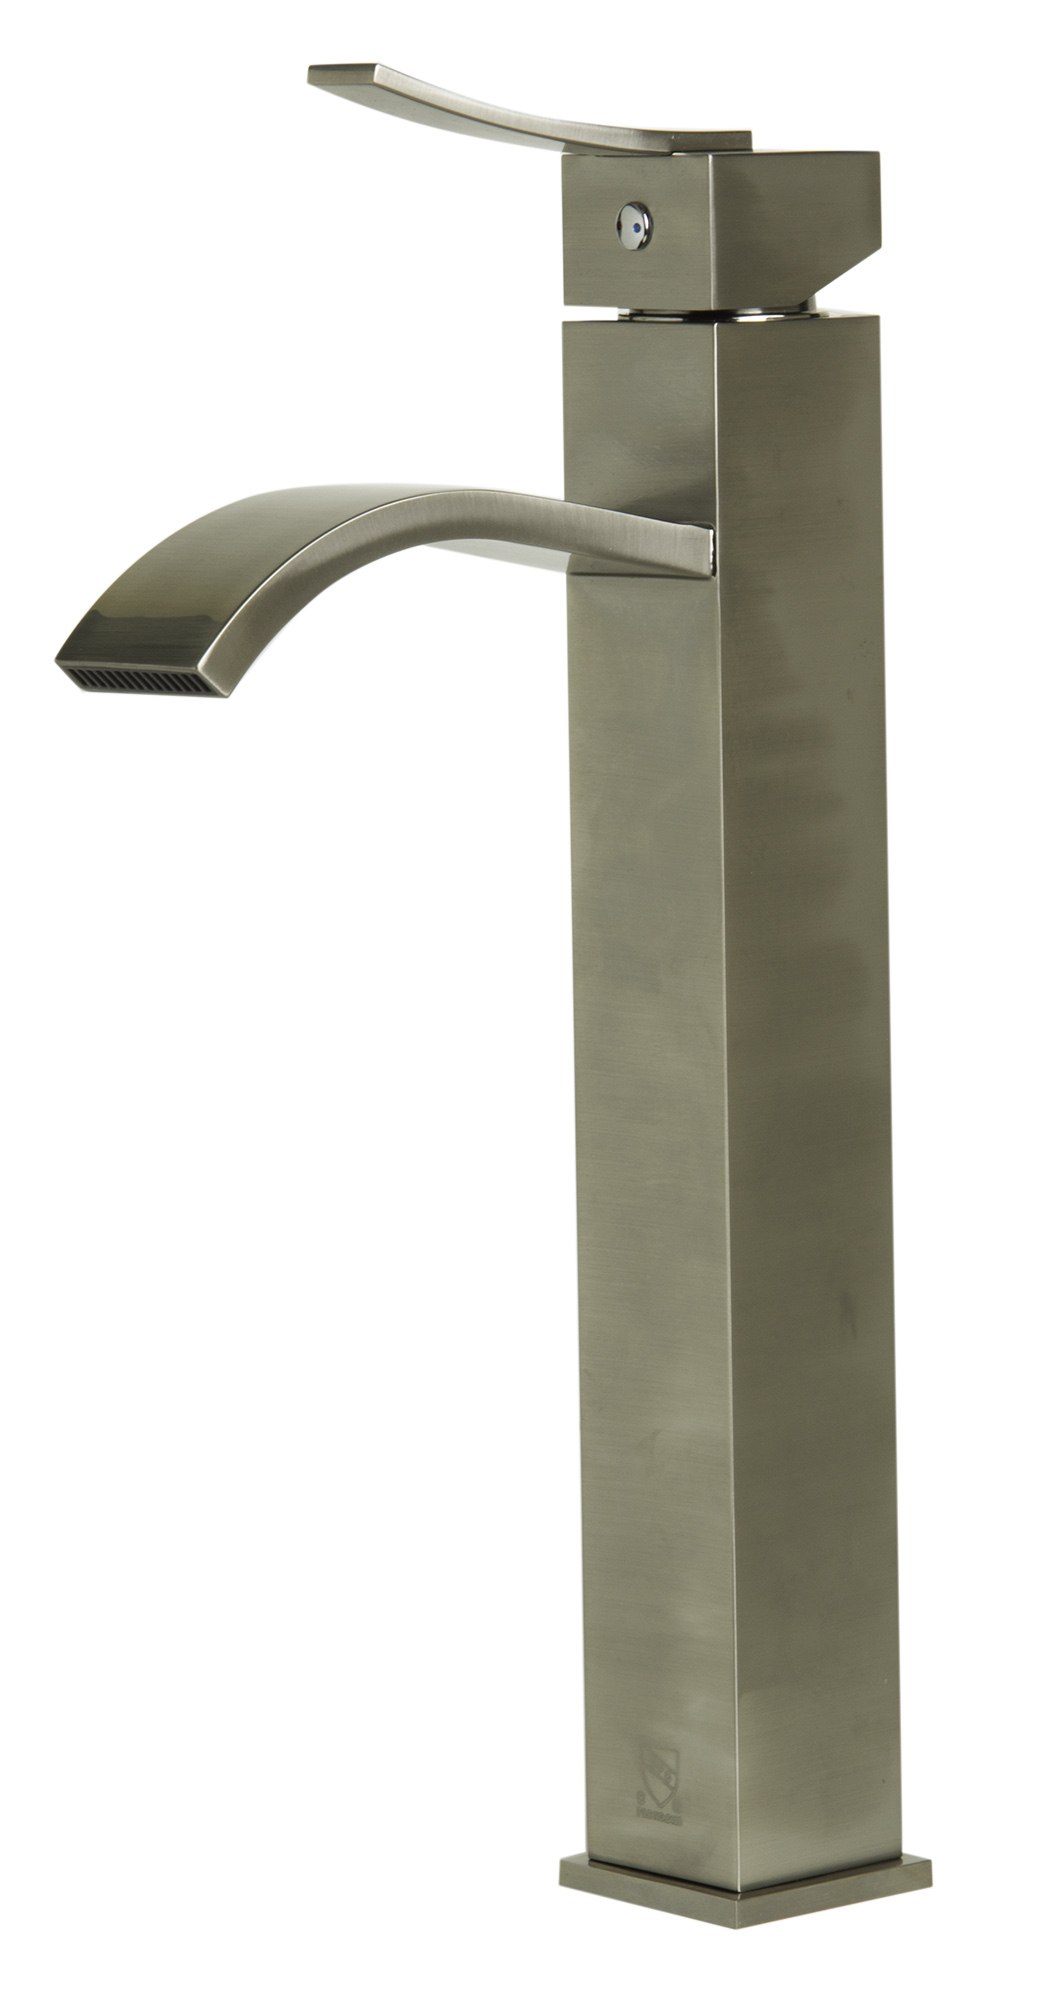 ALFI brand AB1158-BN Tall Brushed Nickel Tall Square Body Curved Spout Single Lever Bathroom Faucet